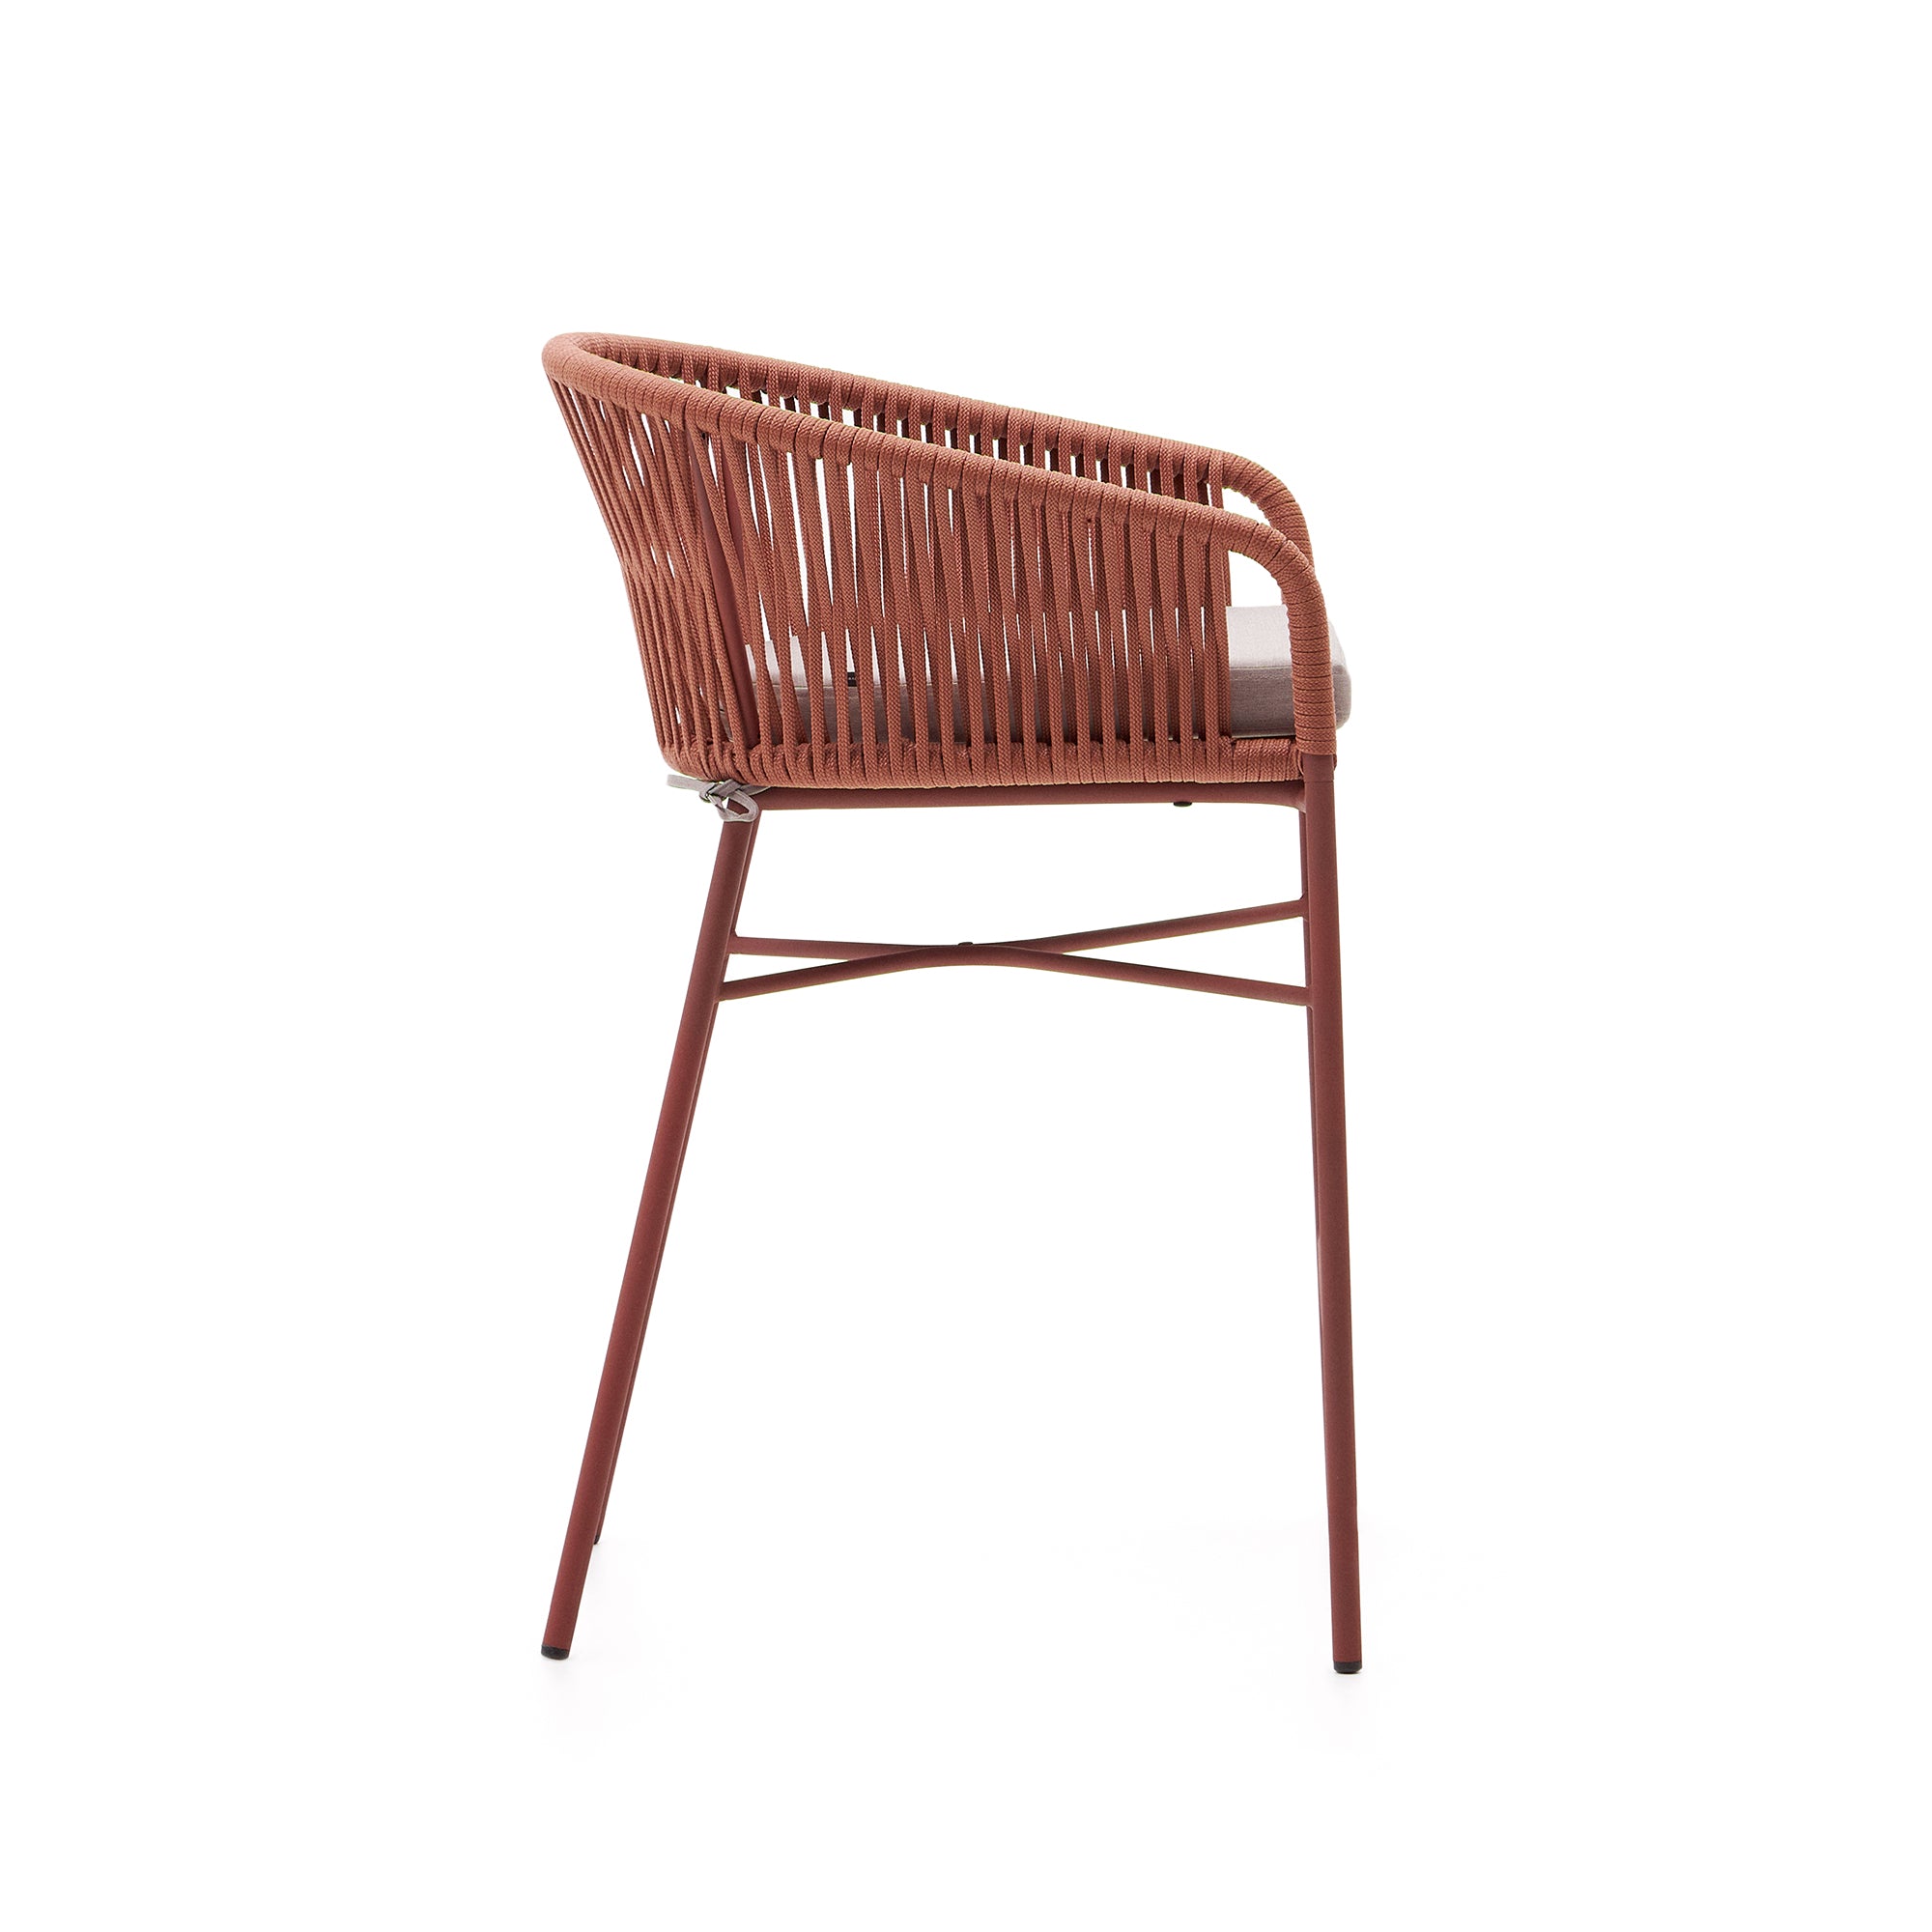 Yanet stackable stool made from terracotta cord and galvanised steel, height 65 cm